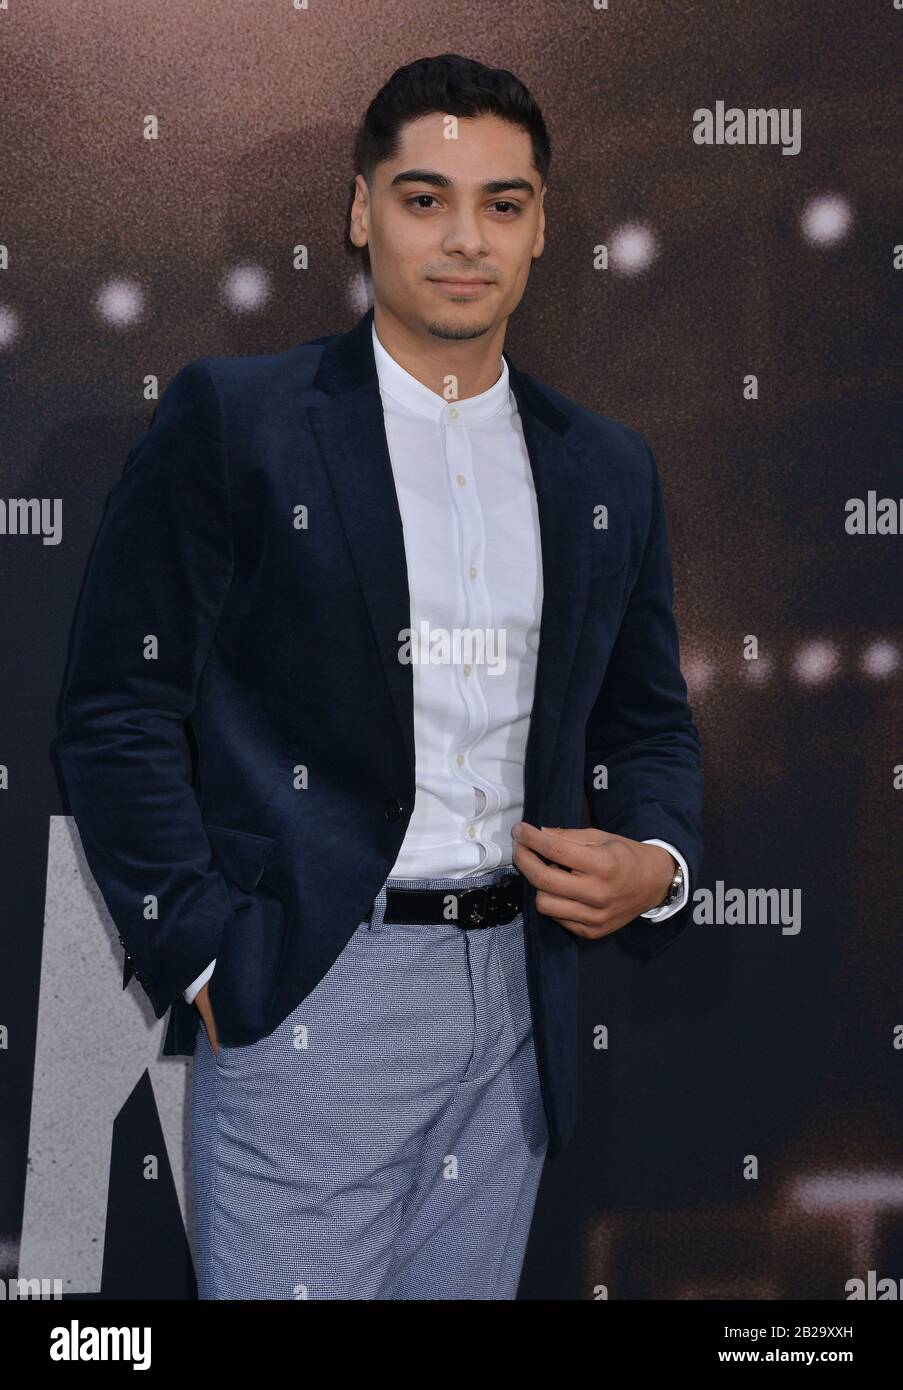 Los Angeles, USA. 01st Mar, 2020. Fernando Luis Vega attend the premiere of Warner Bros Pictures' ' The Way Back' at Regal LA Live on March 01, 2020 in Los Angeles, California. Credit: Tsuni/USA/Alamy Live News Stock Photo